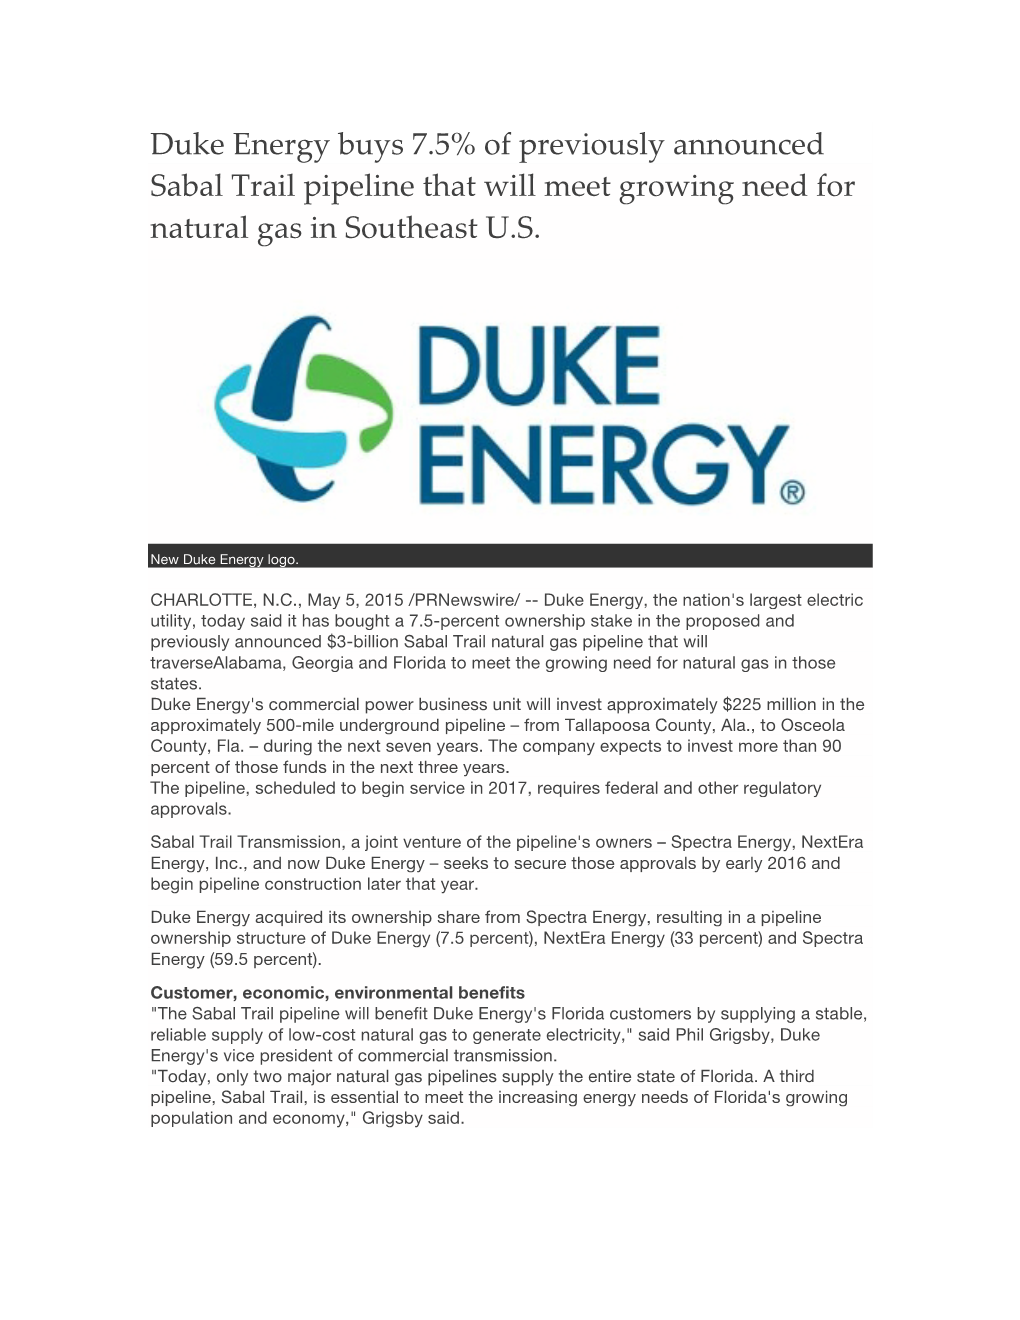 Duke Energy Buys 7.5% of Previously Announced Sabal Trail Pipeline That Will Meet Growing Need for Natural Gas in Southeast U.S